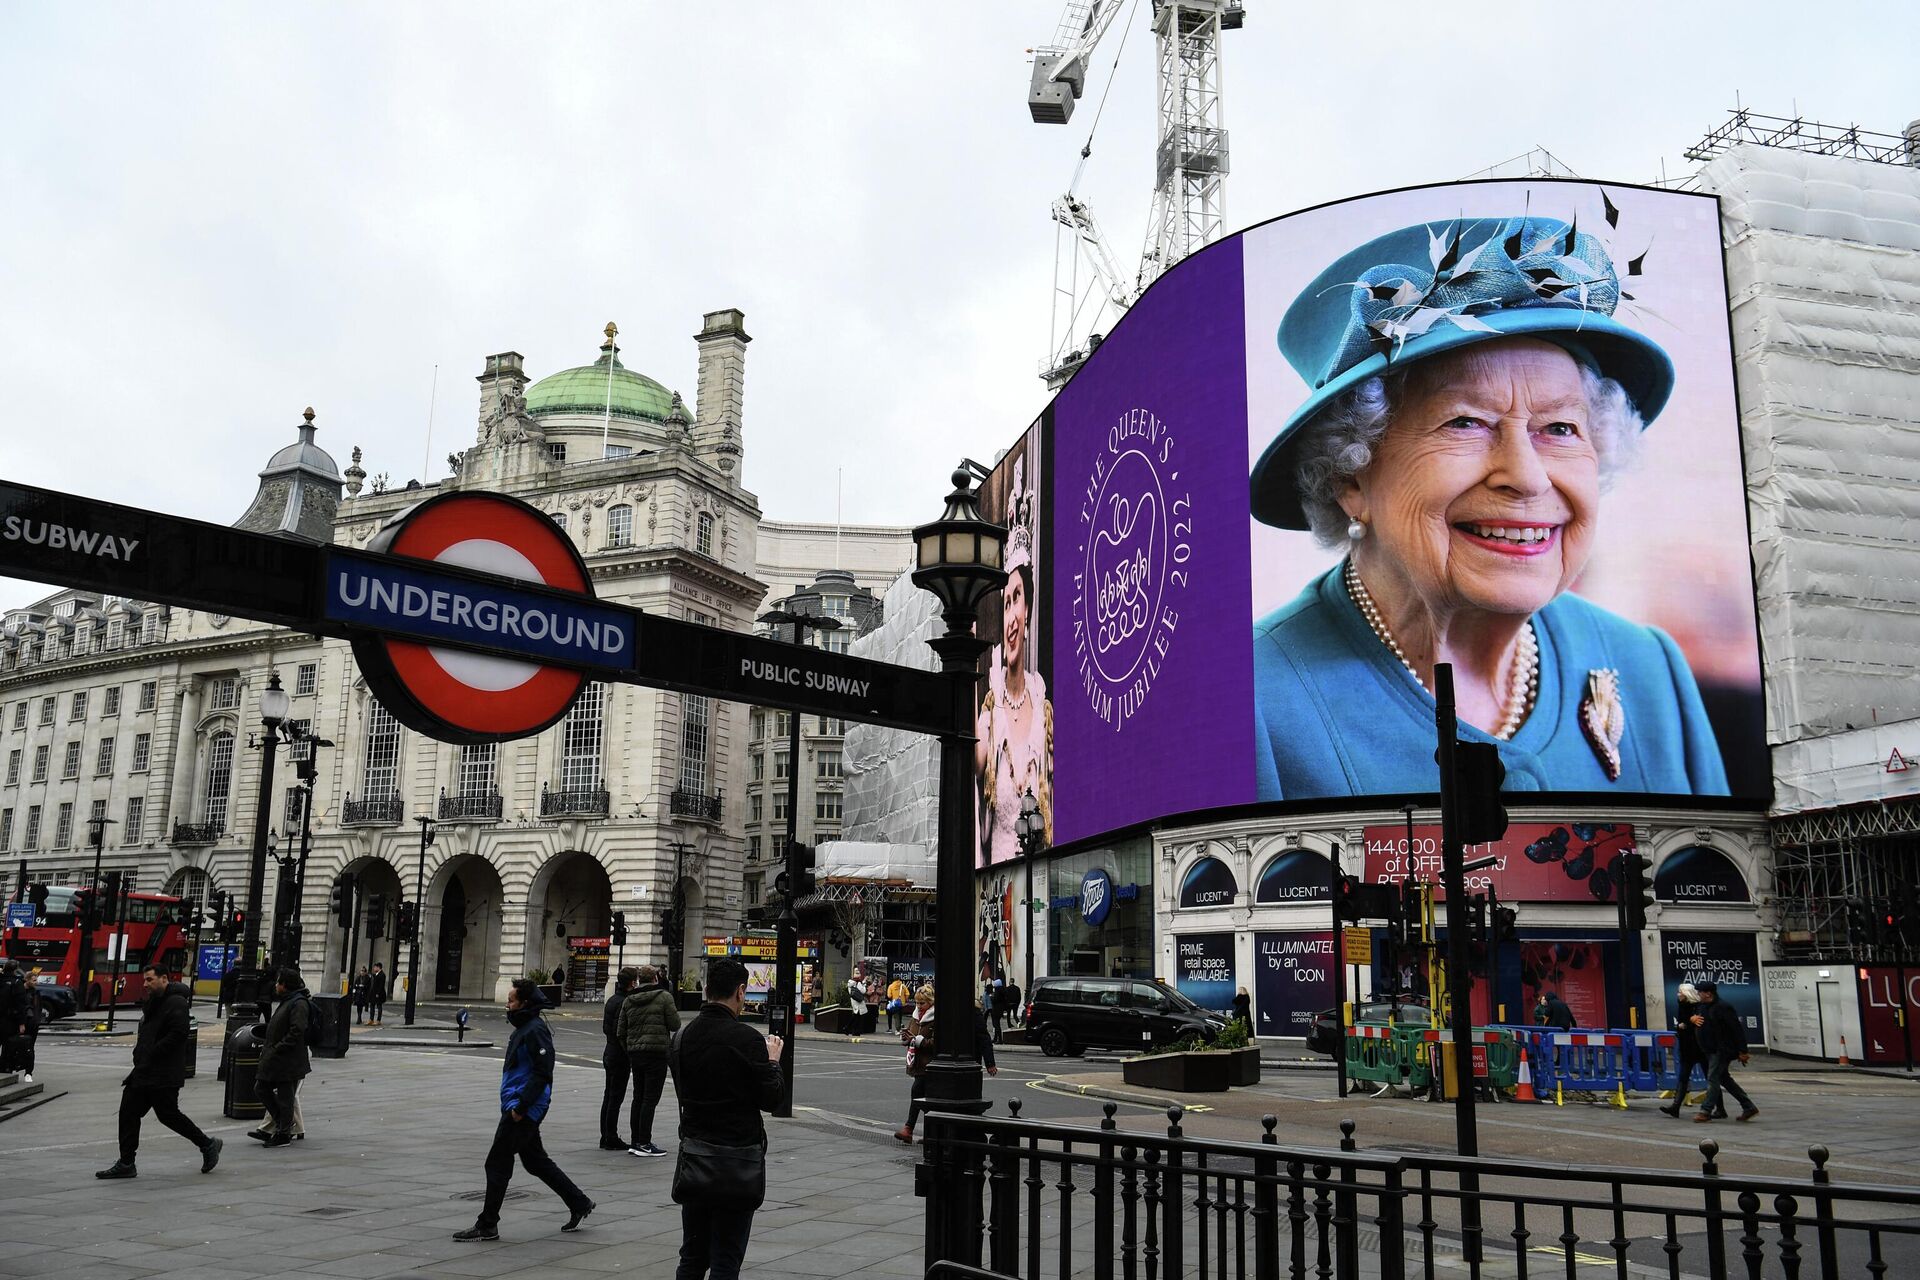 Images of Britain's Queen Elizabeth II are displayed on the big digital screens at Piccadilly Circus in central London on February 6, 2022, to mark the start of Her Majesty's Platinum Jubilee Year - Sputnik International, 1920, 08.05.2022